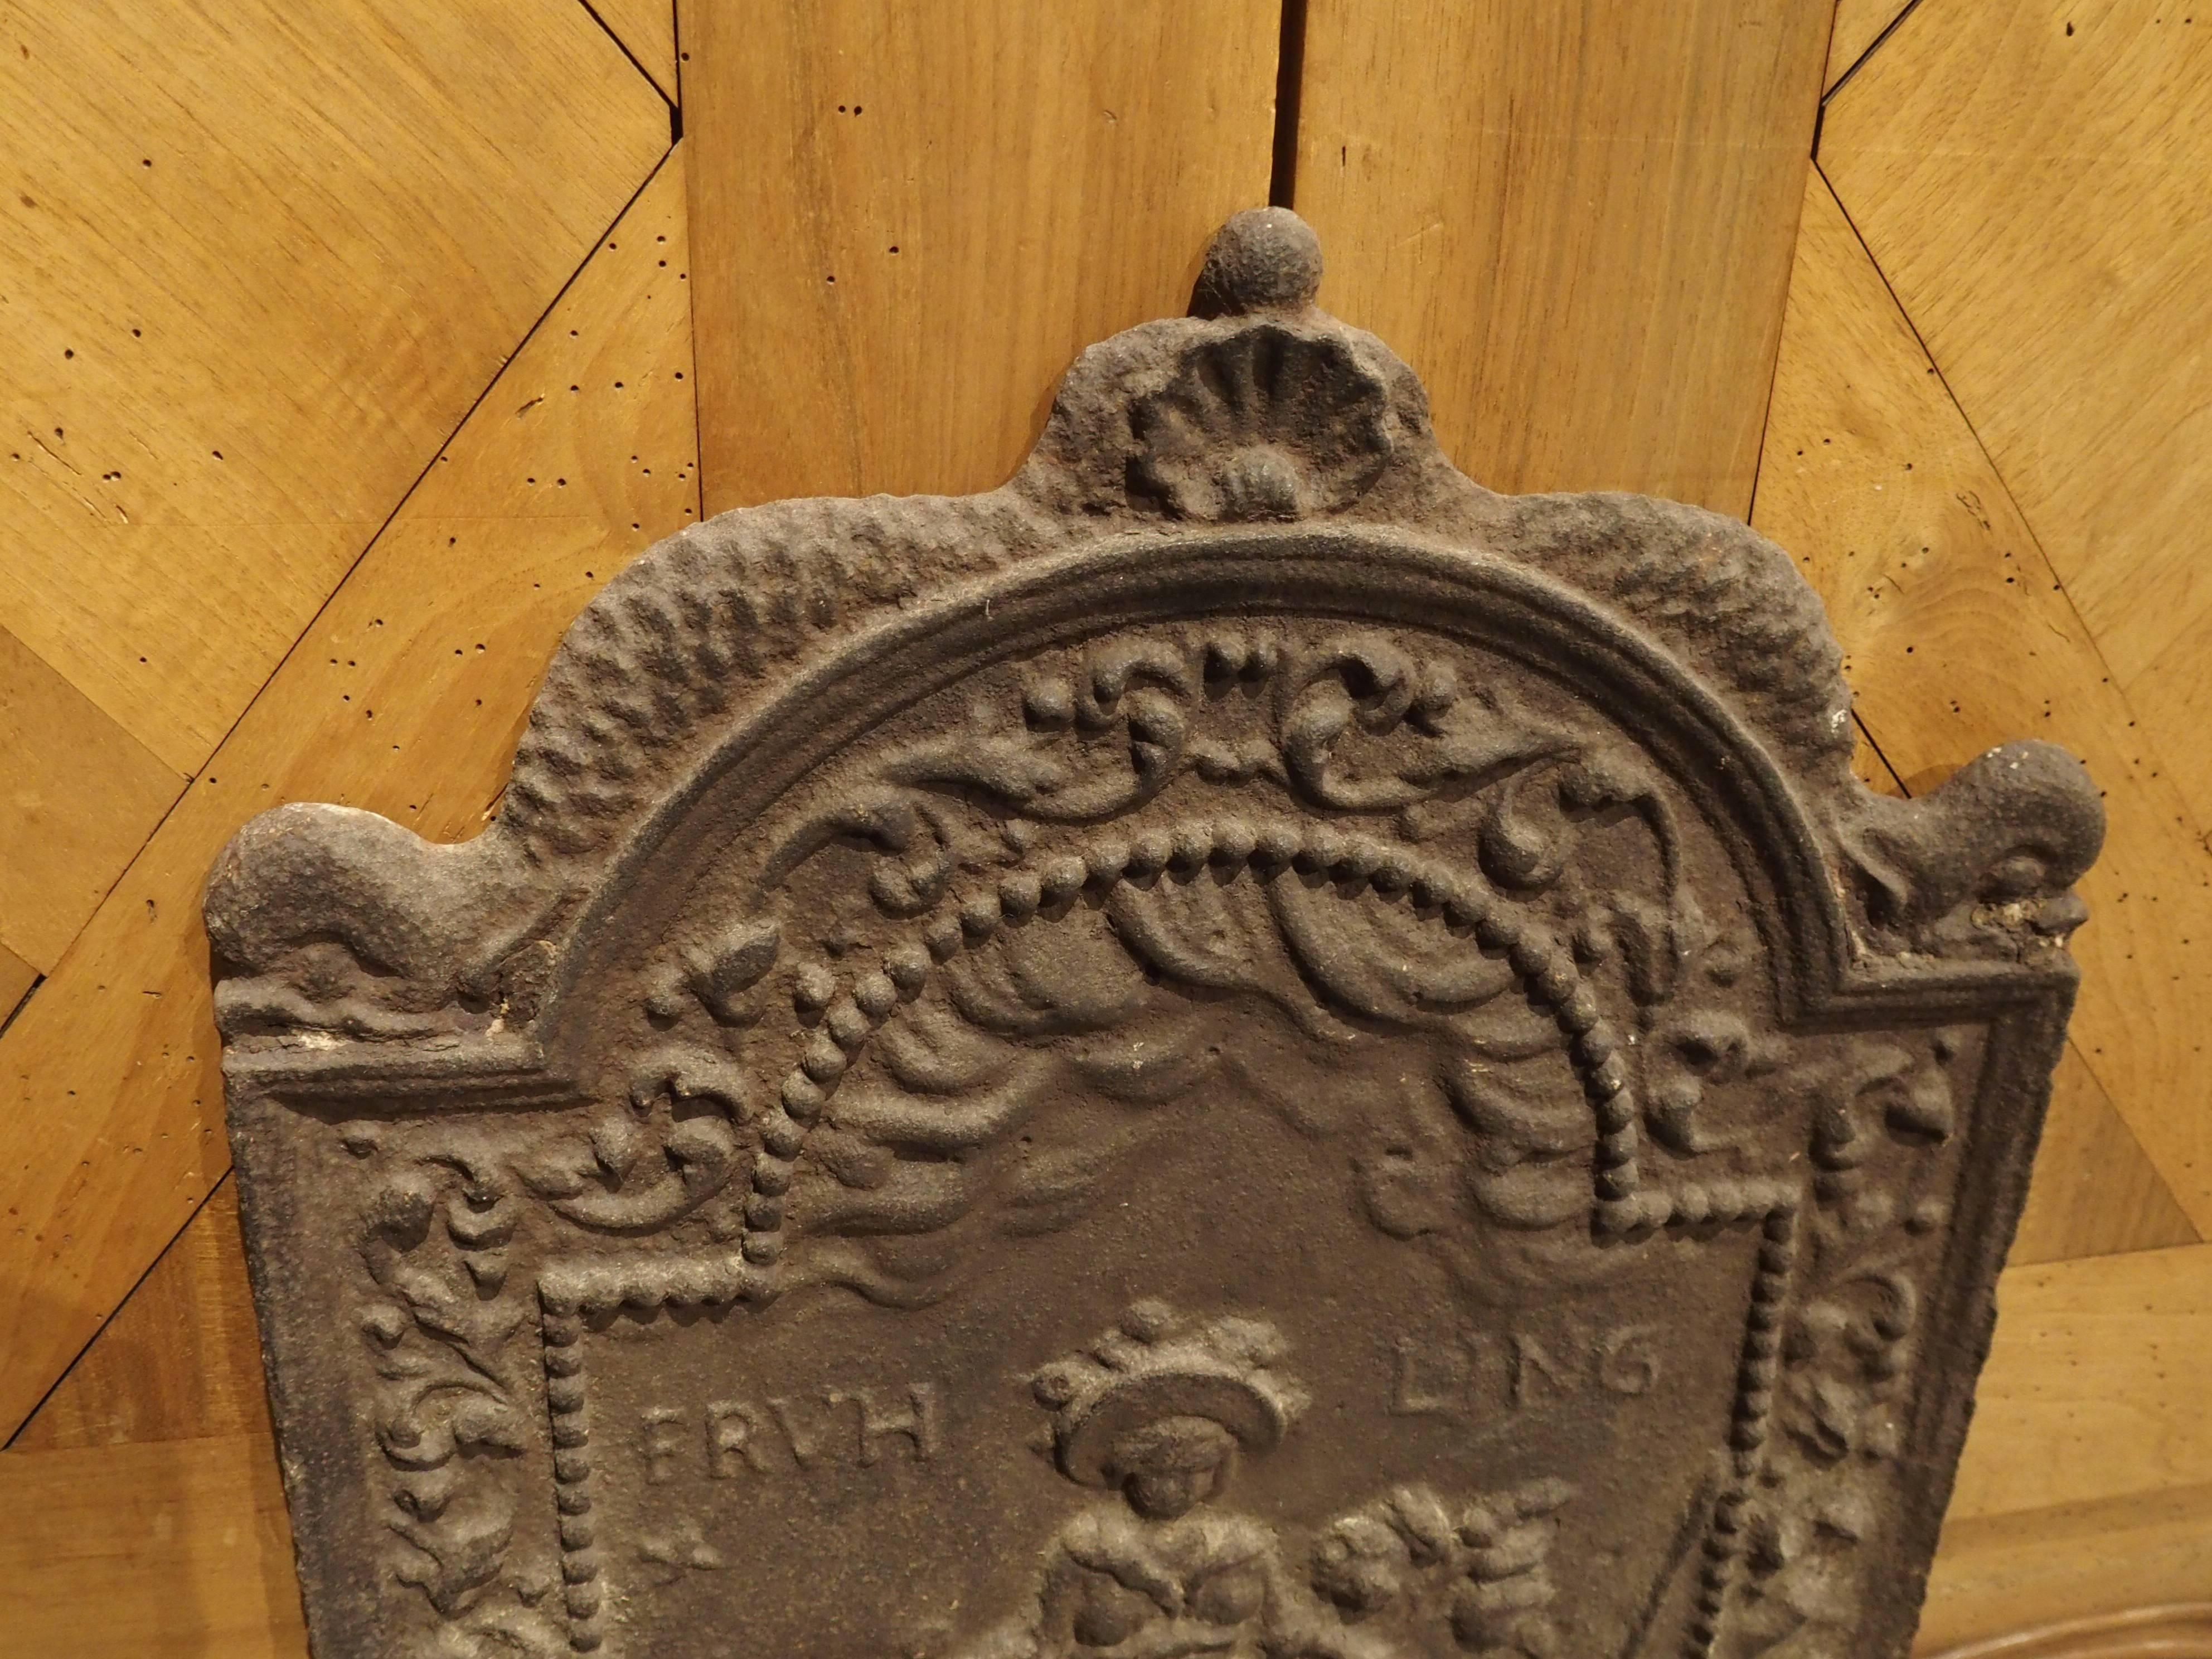 This beautiful 19th century French iron fireback has an arched top with four right angles. At the peak of the arch is a shell surrounded on either side by dolphins. The front depicts a young girl wearing a bonnet in a landscape setting, with a